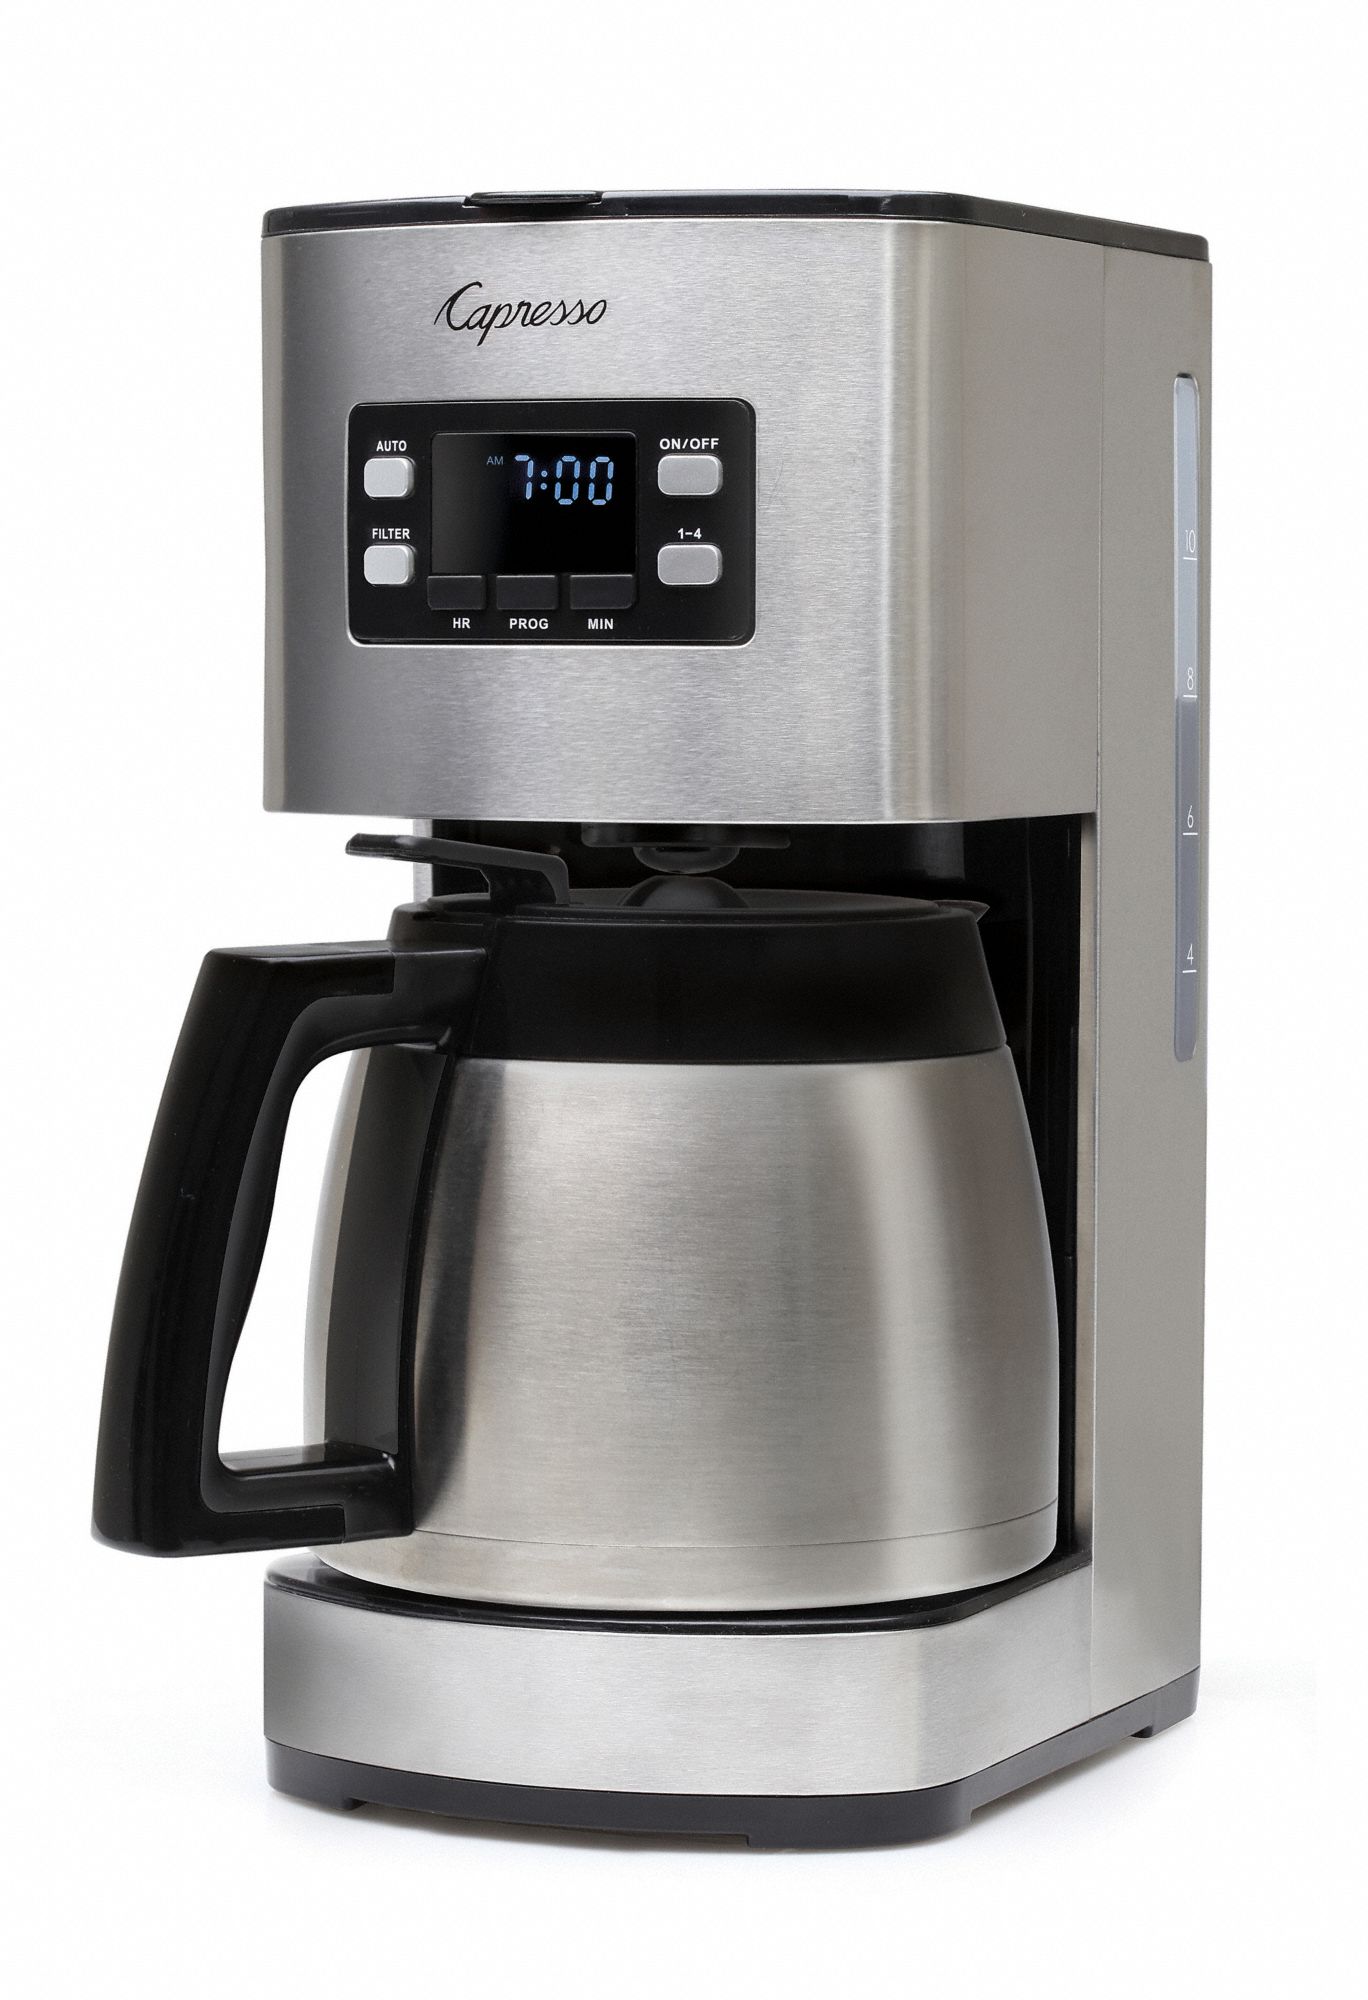 Thermal Coffee Maker, 10 Cup: Drip, 50 oz, 1000W/120V/60Hz, Stainless Steel, Silver/Black